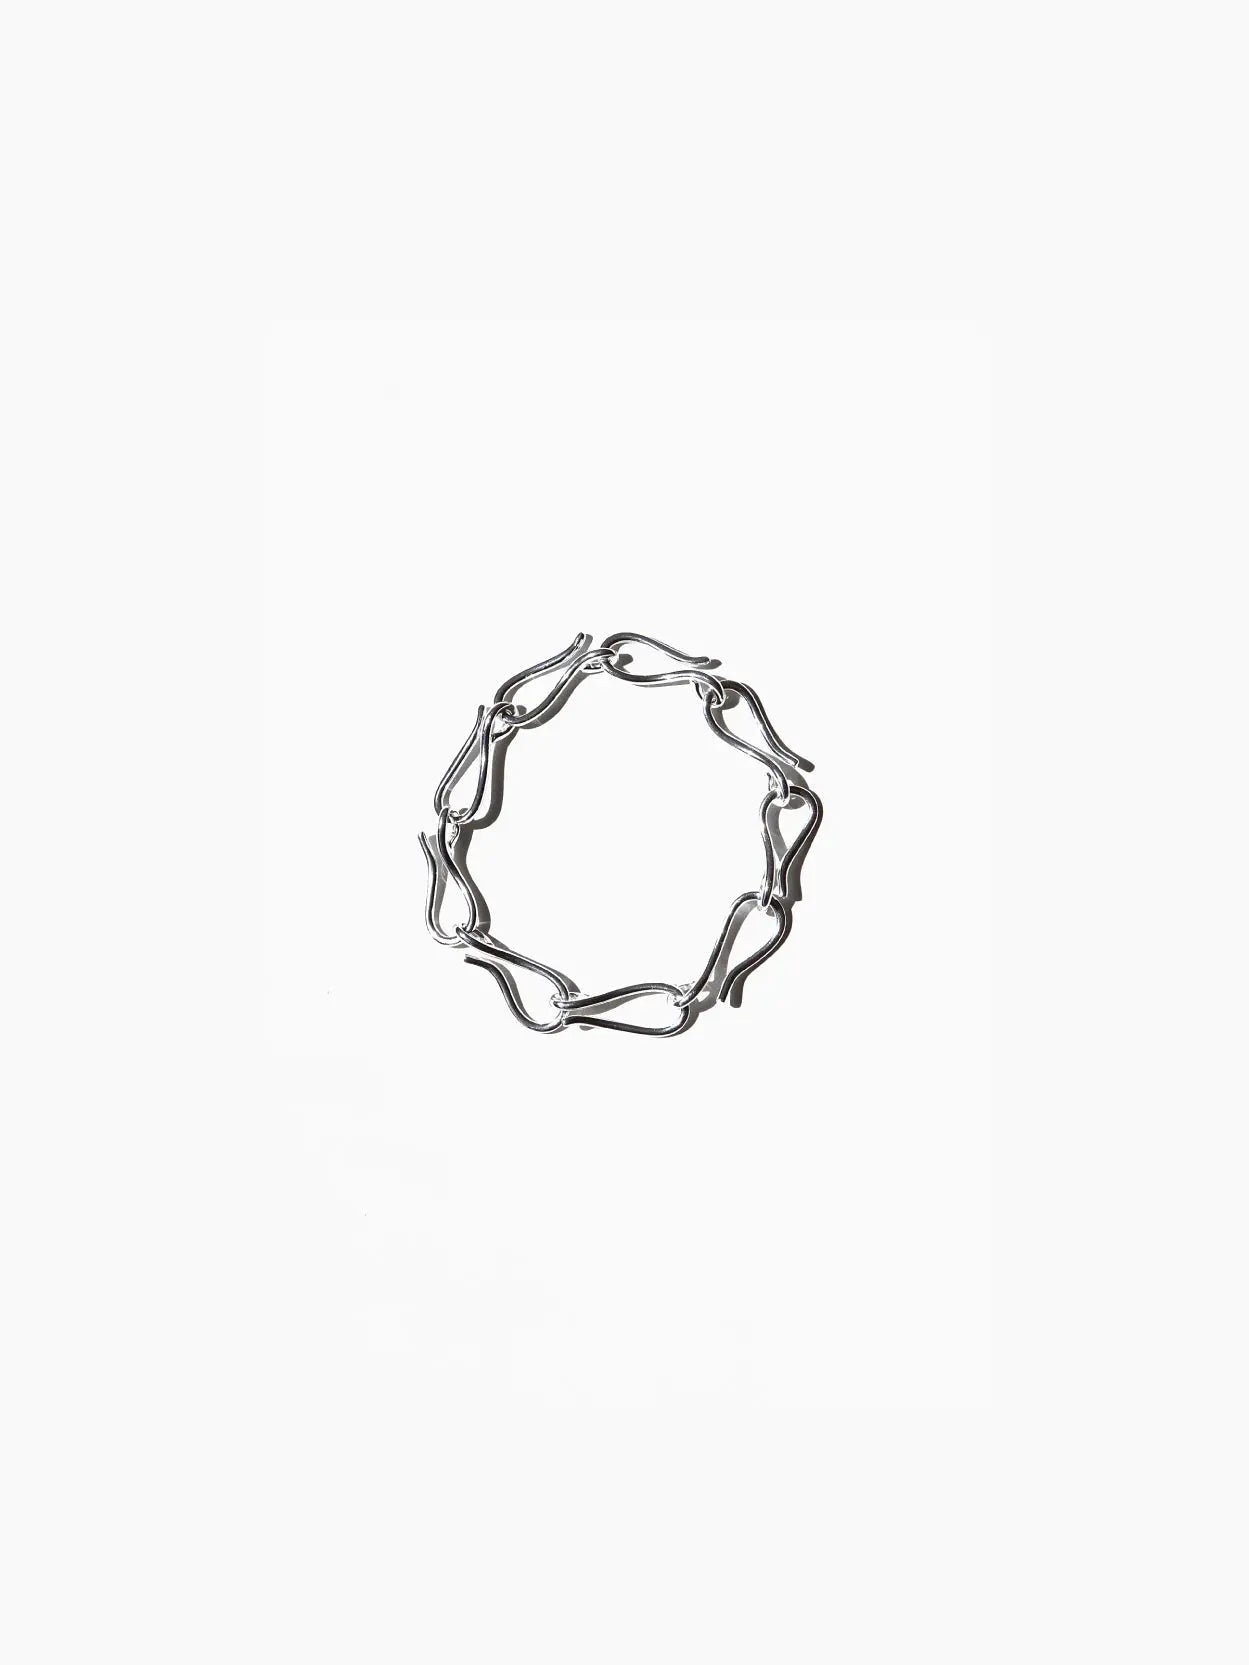 A Lagoa Bracelet by Nathalie Schreckenberg with an abstract, wavy design forming interconnected loops, arranged in a circular shape against a plain white background, available exclusively at Bassalstore in Barcelona.